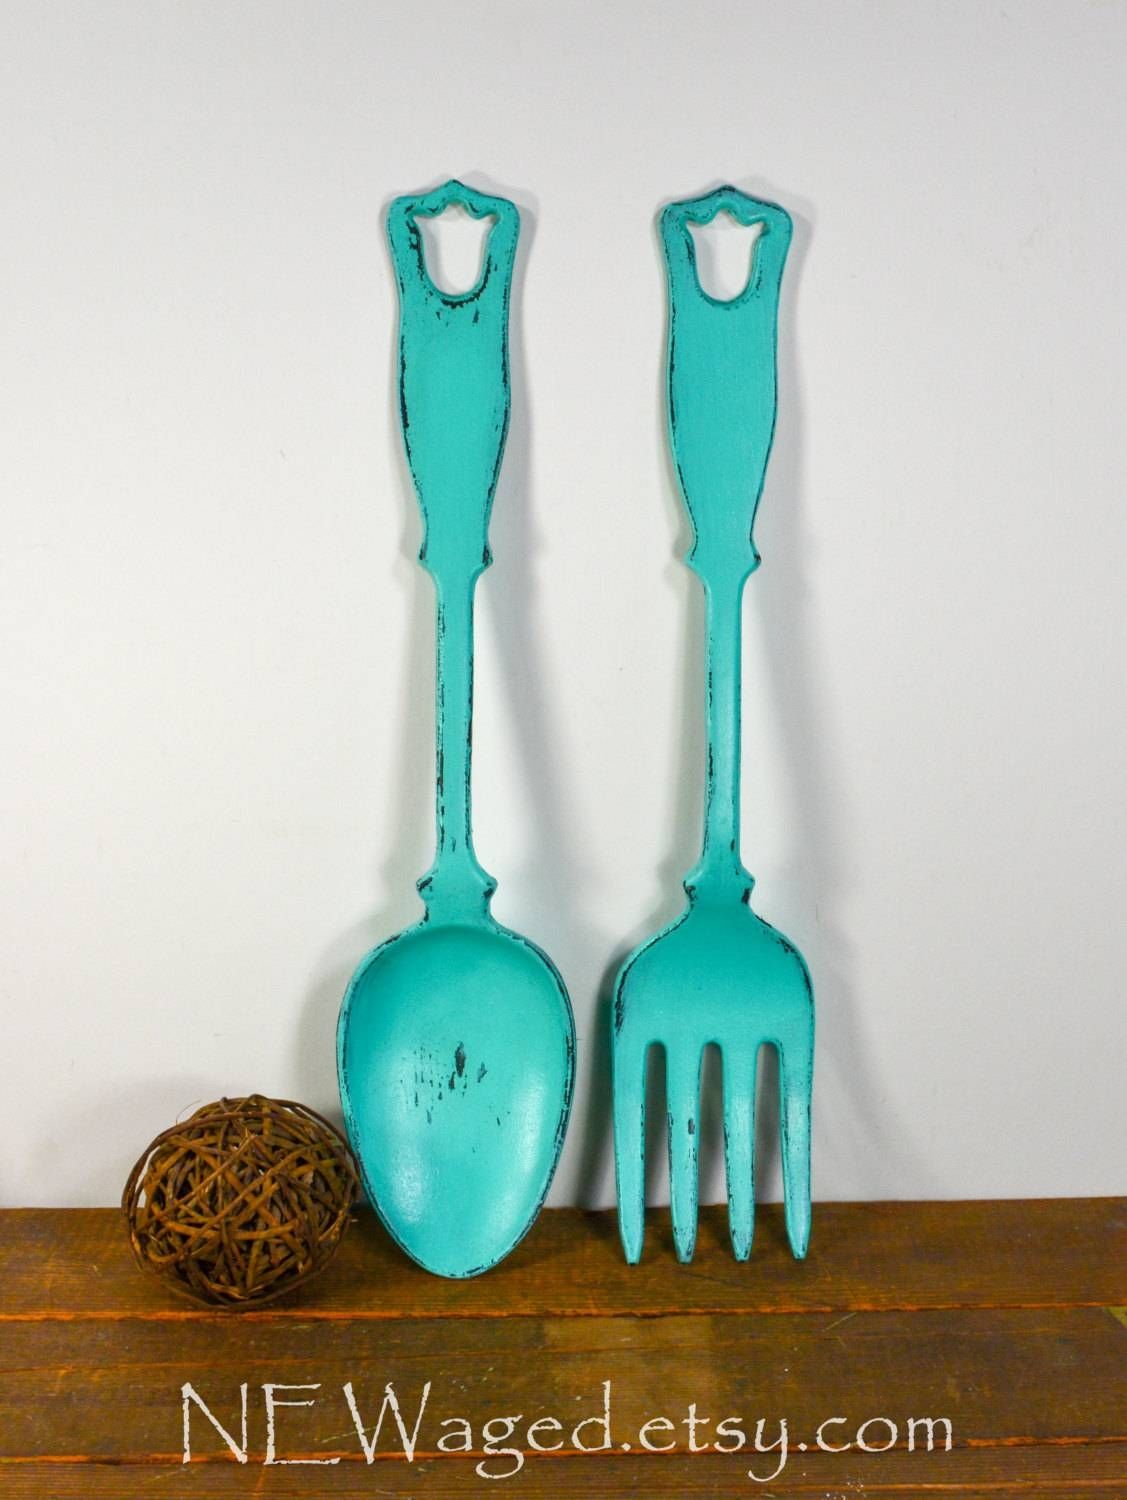 Oversized Spoon And Fork Wall Decor | Home Decor And Design Inside Newest Big Spoon And Fork Decors (Gallery 24 of 25)